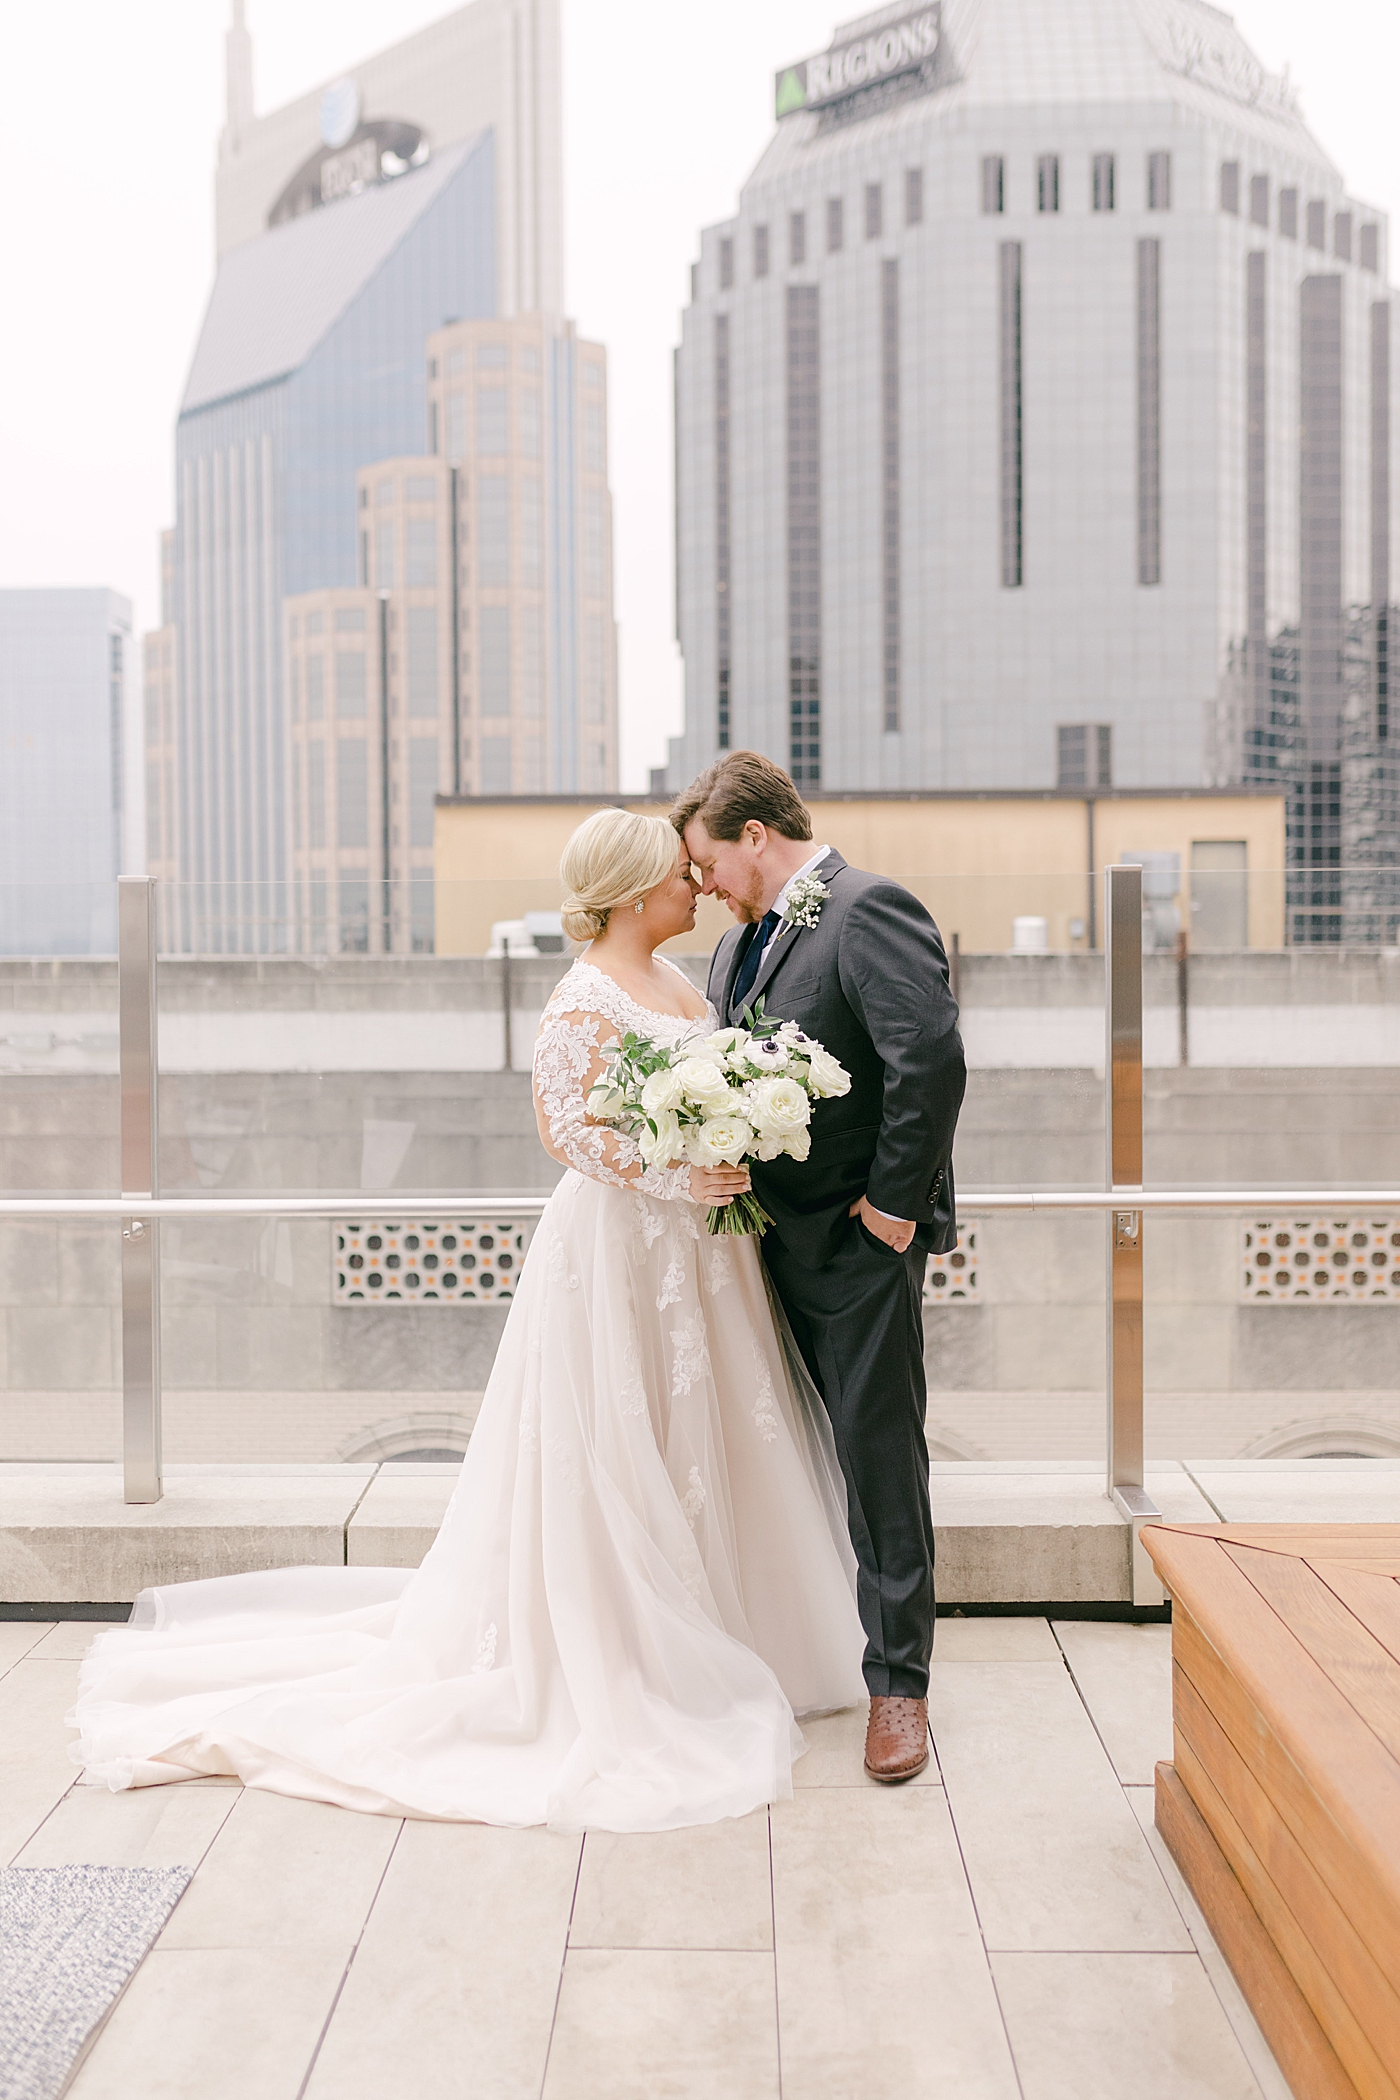 Bride and groom portraits on a rooftop in Nashville | Photo by Hope Helmuth Photography